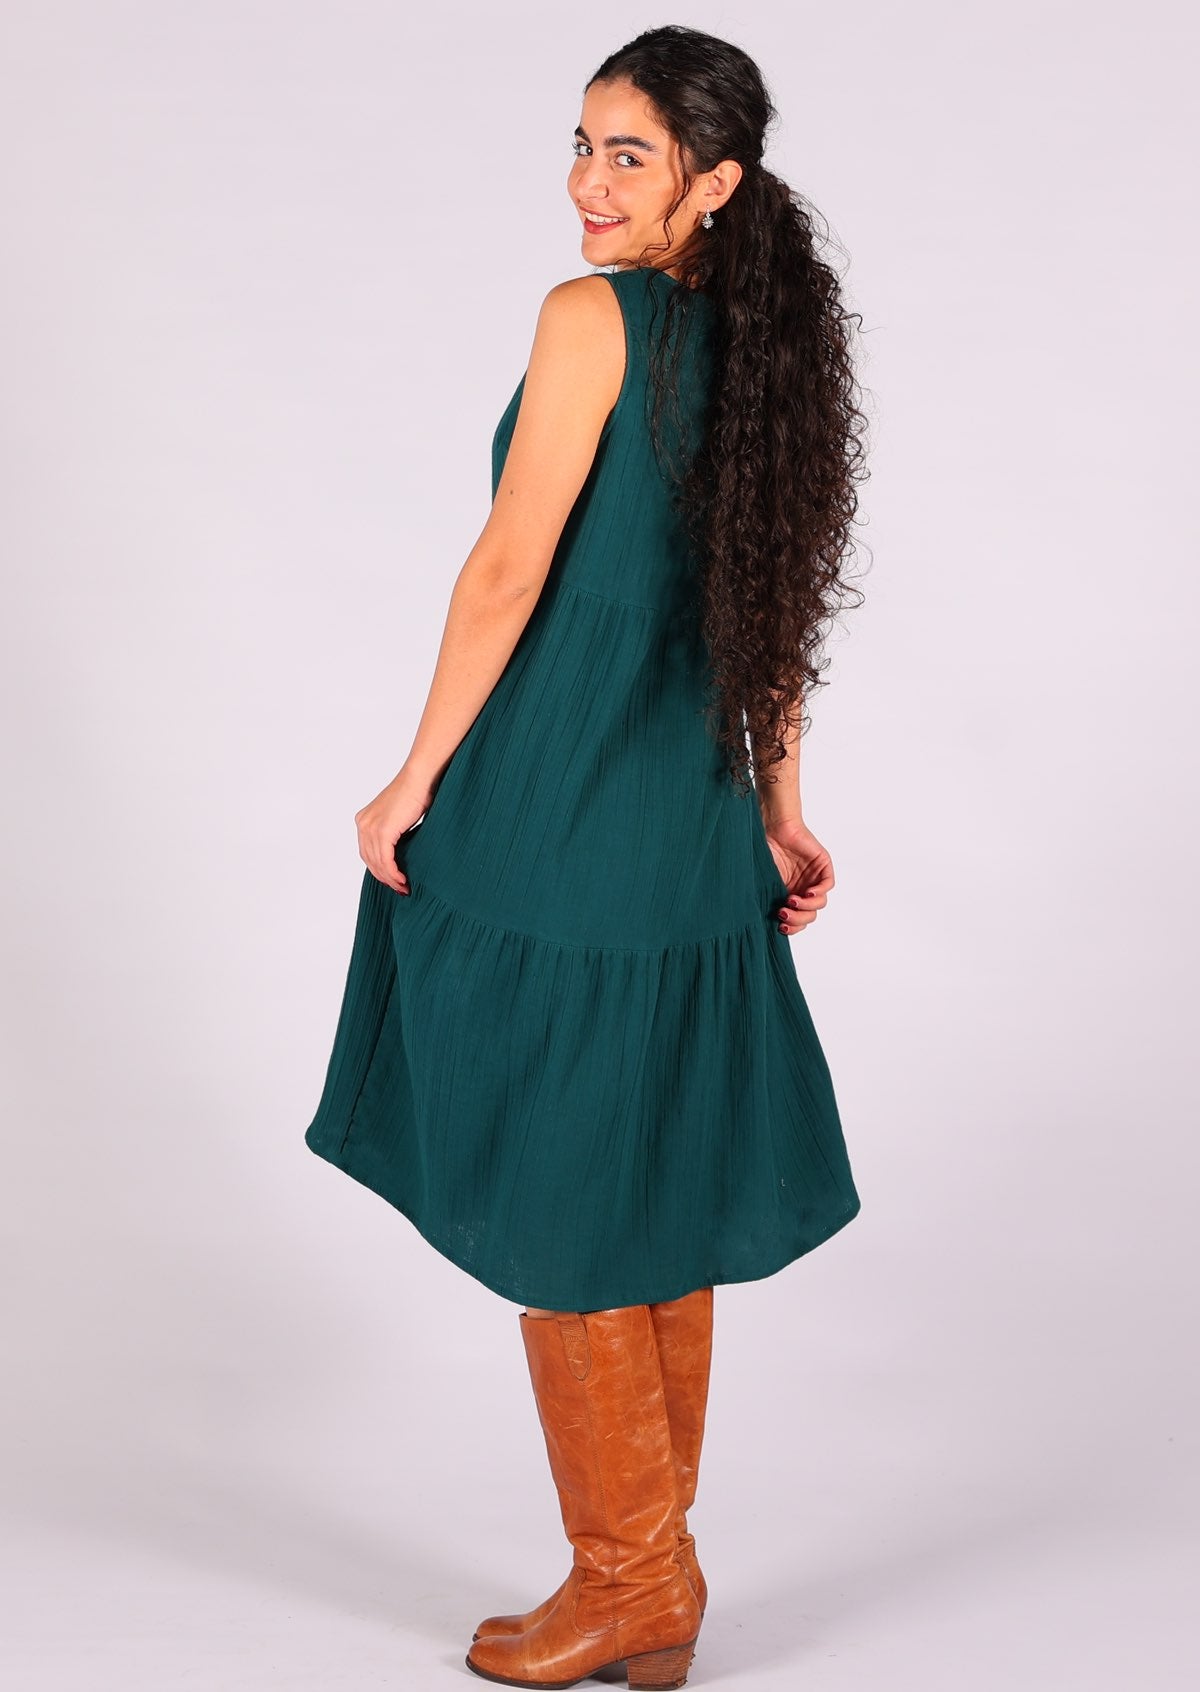 Sleeveless tiered double cotton dress in gorgeous deep teal colour sits over the knee